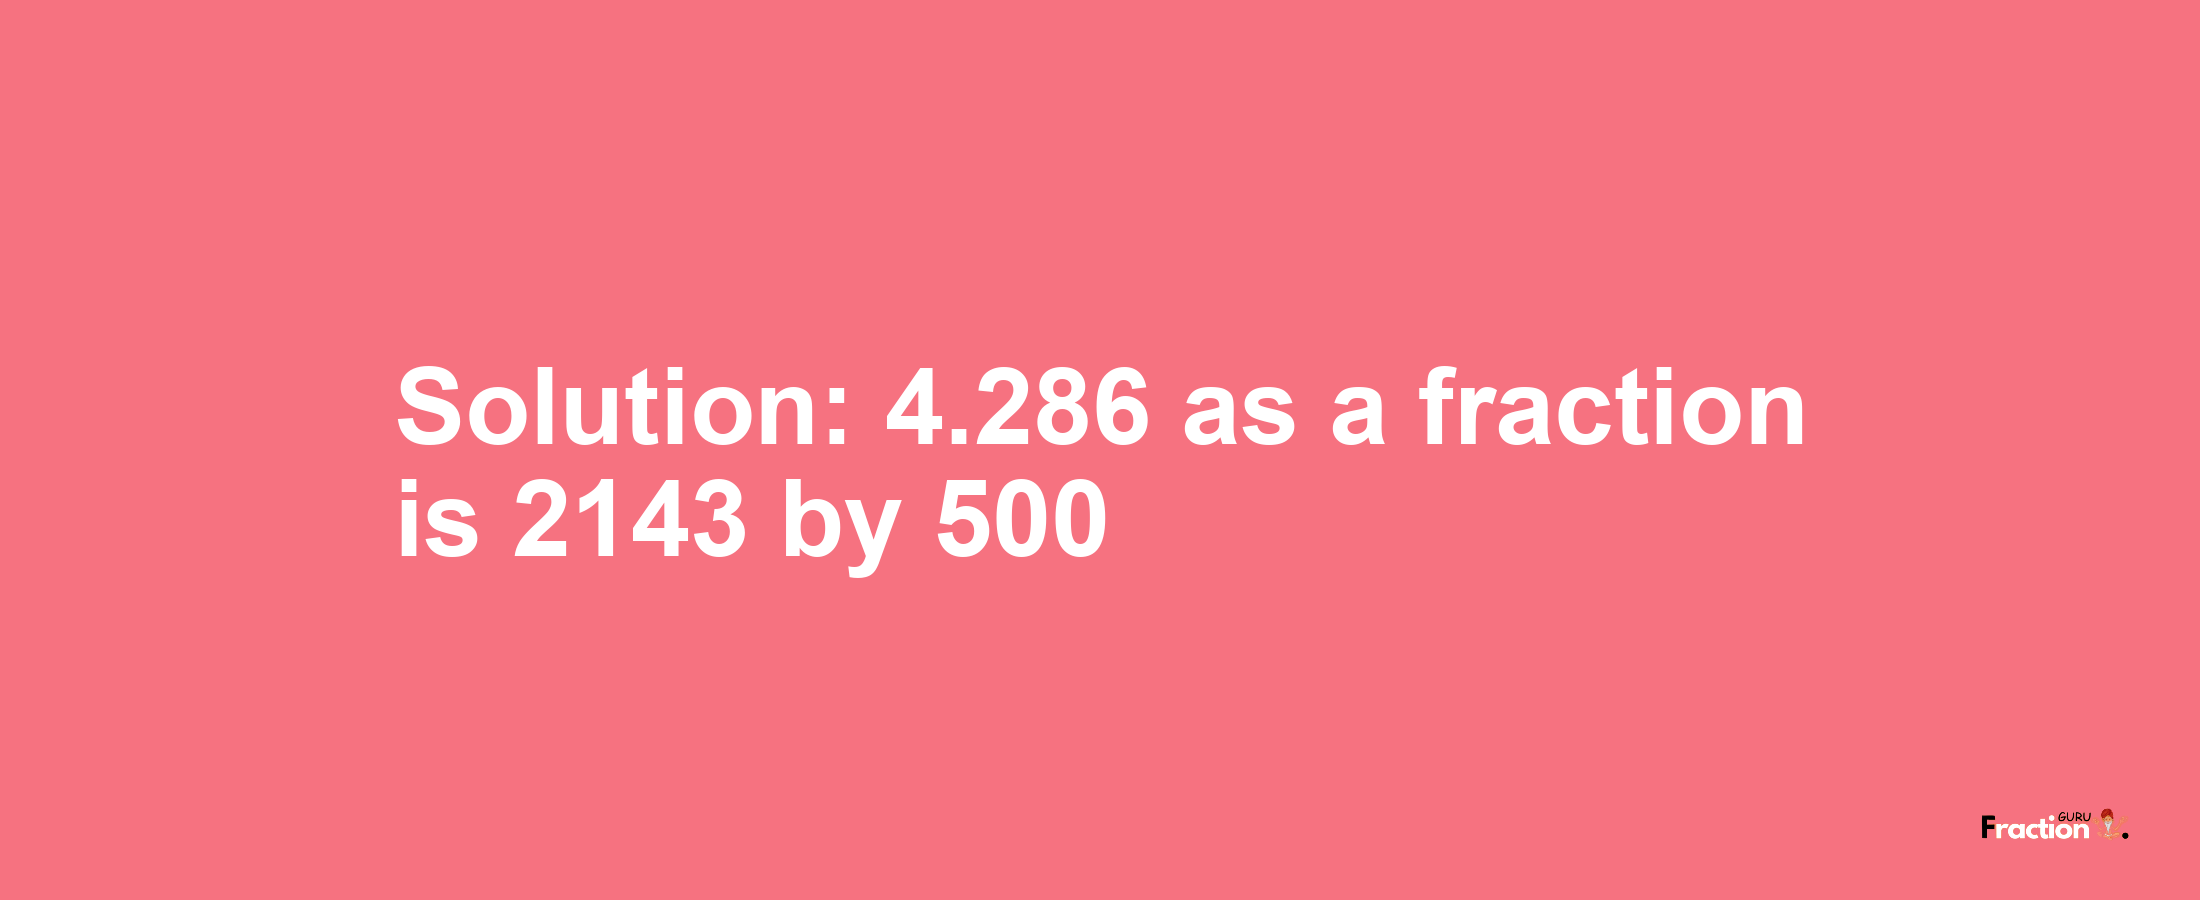 Solution:4.286 as a fraction is 2143/500